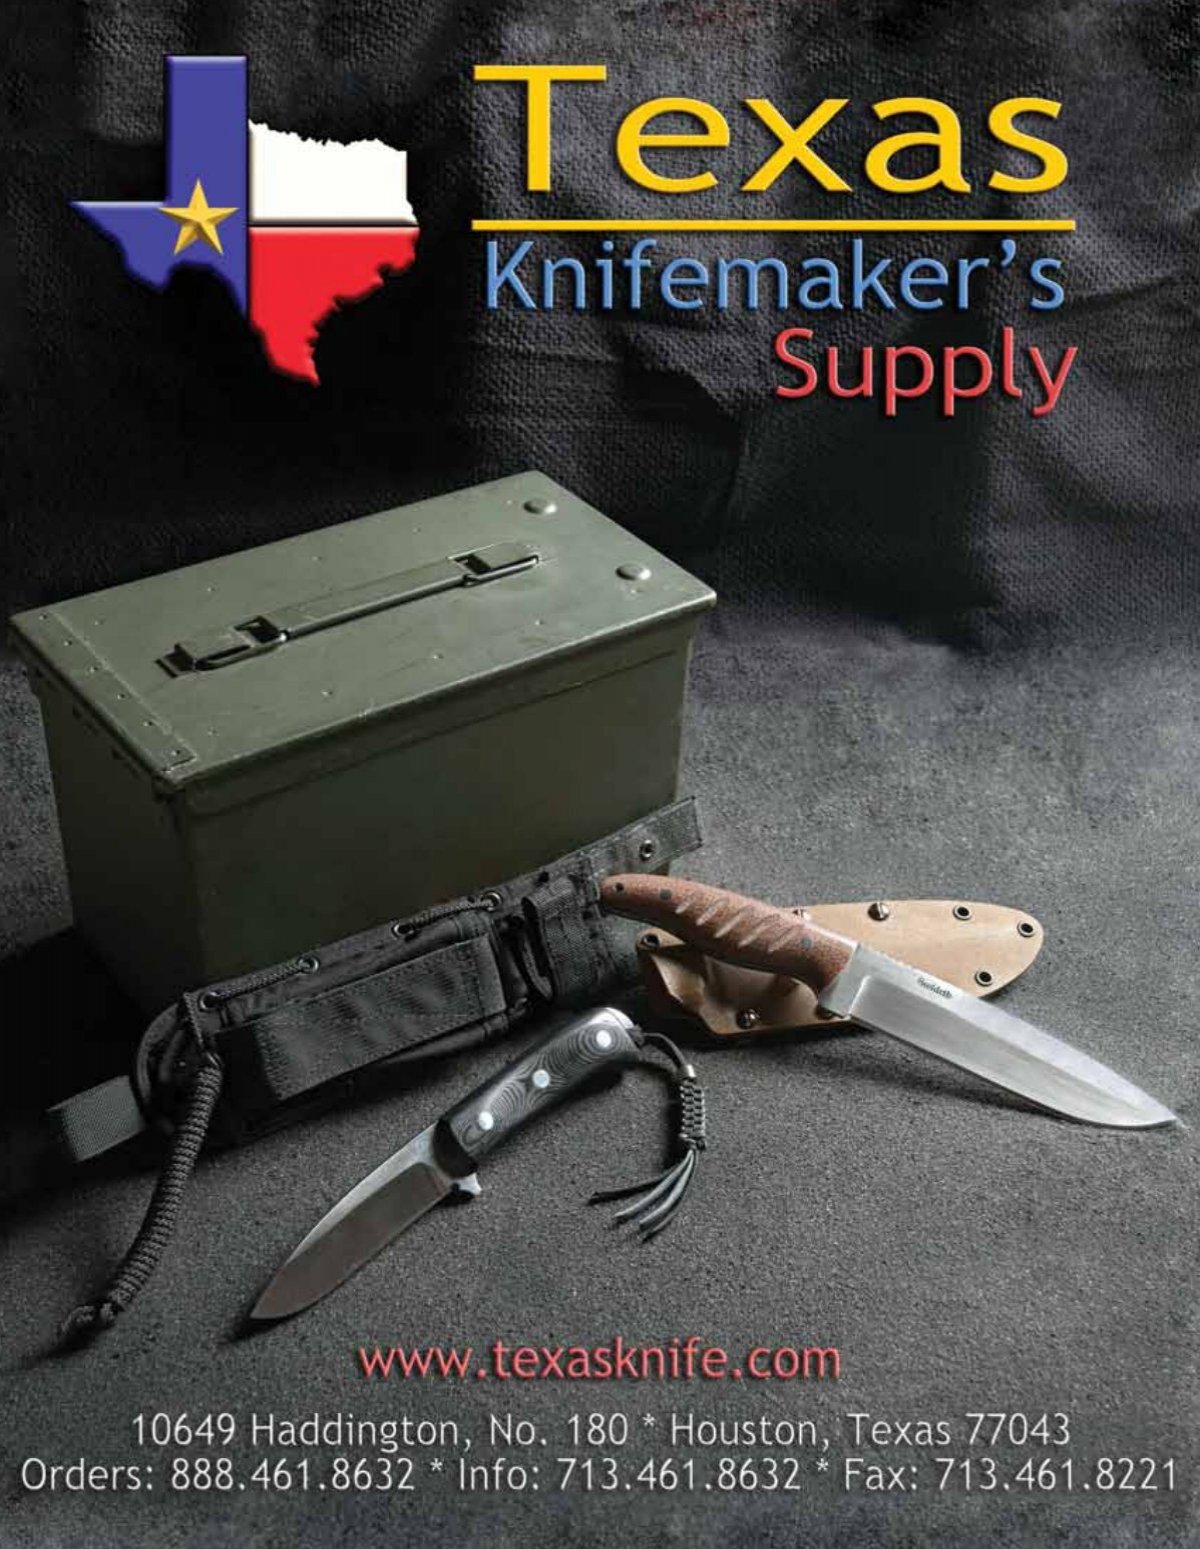 Product List - Texas Knifemaker's Supply